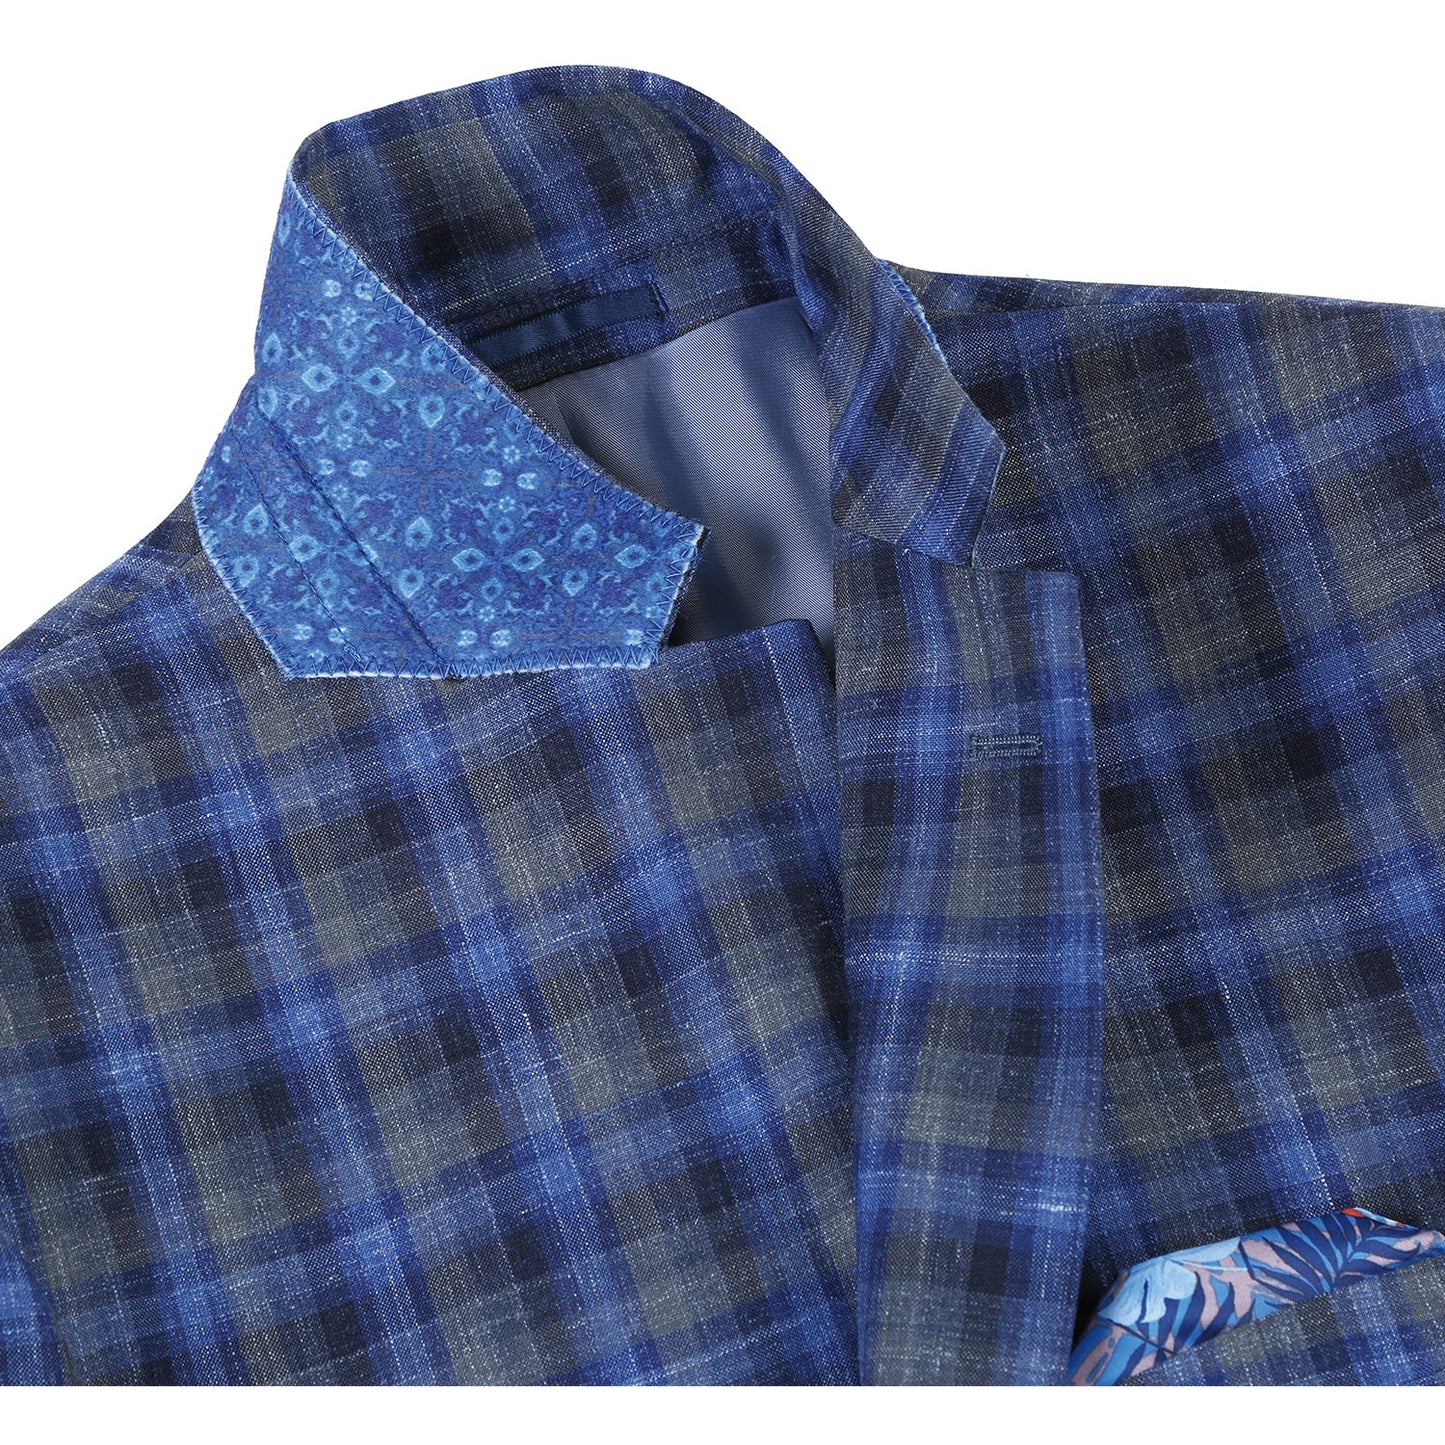 563-1 Men's Slim Fit Wool and Linen Blend Blue and Grey Plaid Sport Coat